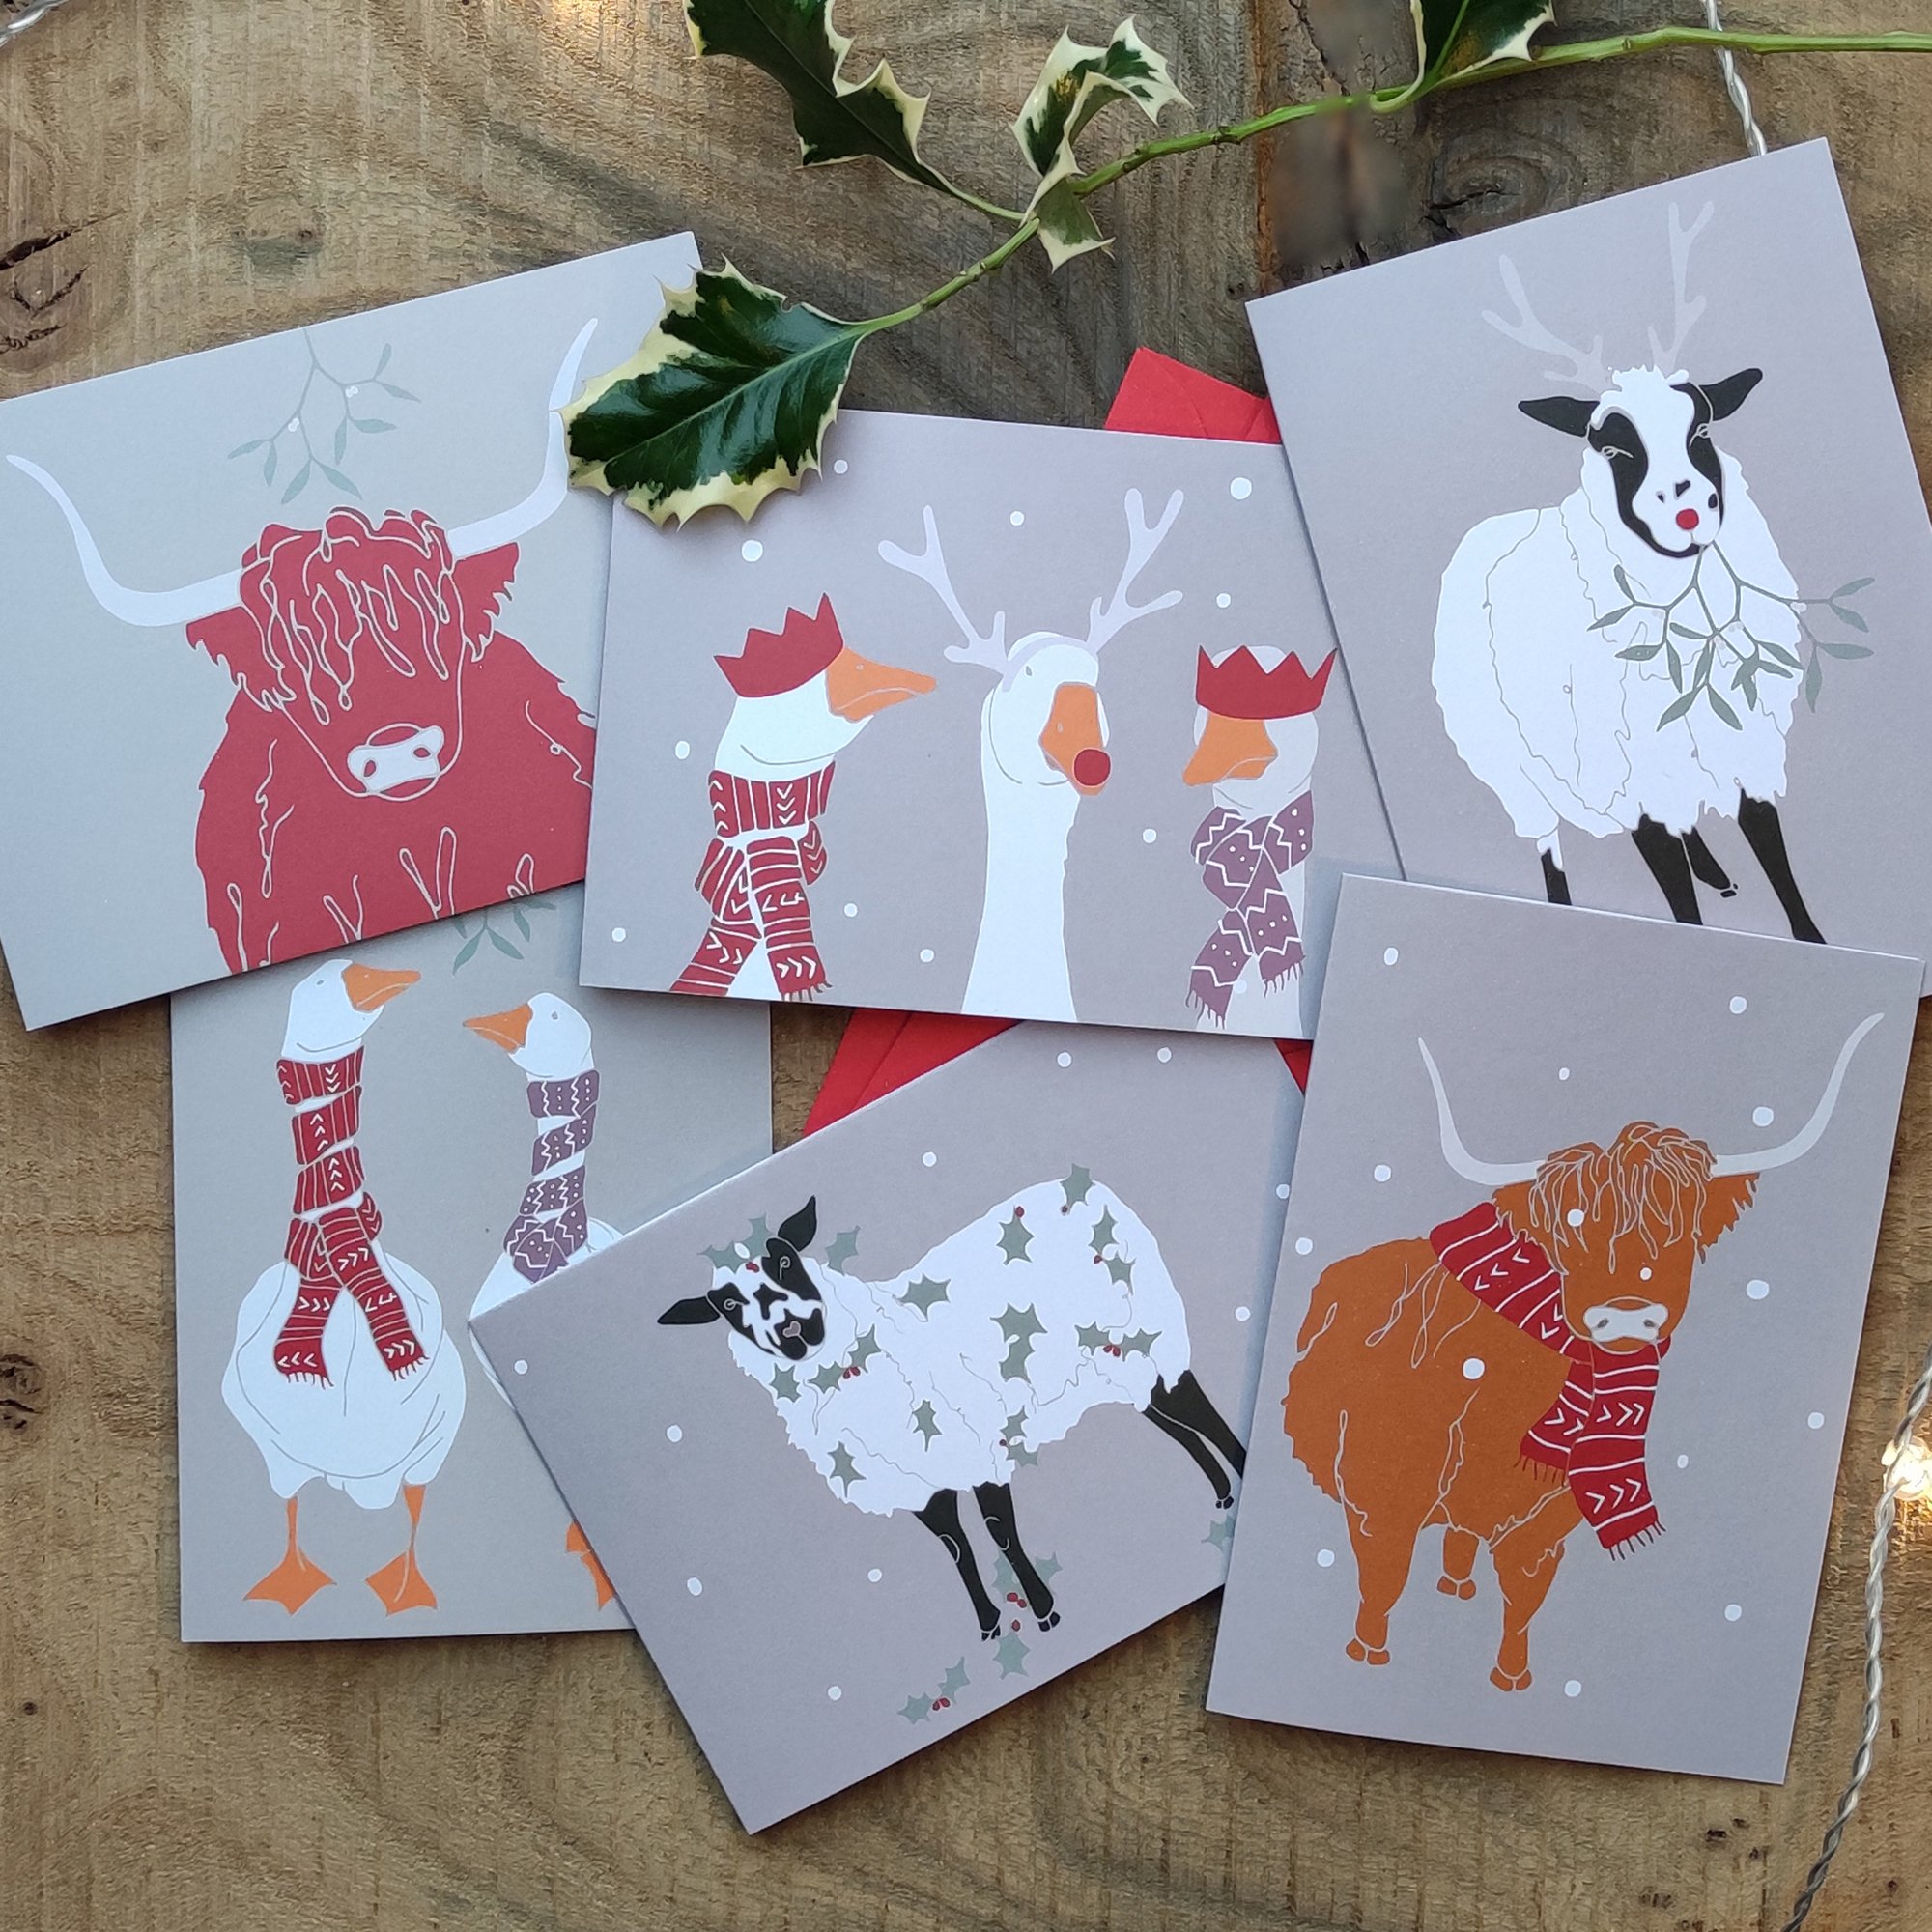 Copy of Claire Brownbridge_Country Christmas Cards_group1.jpg